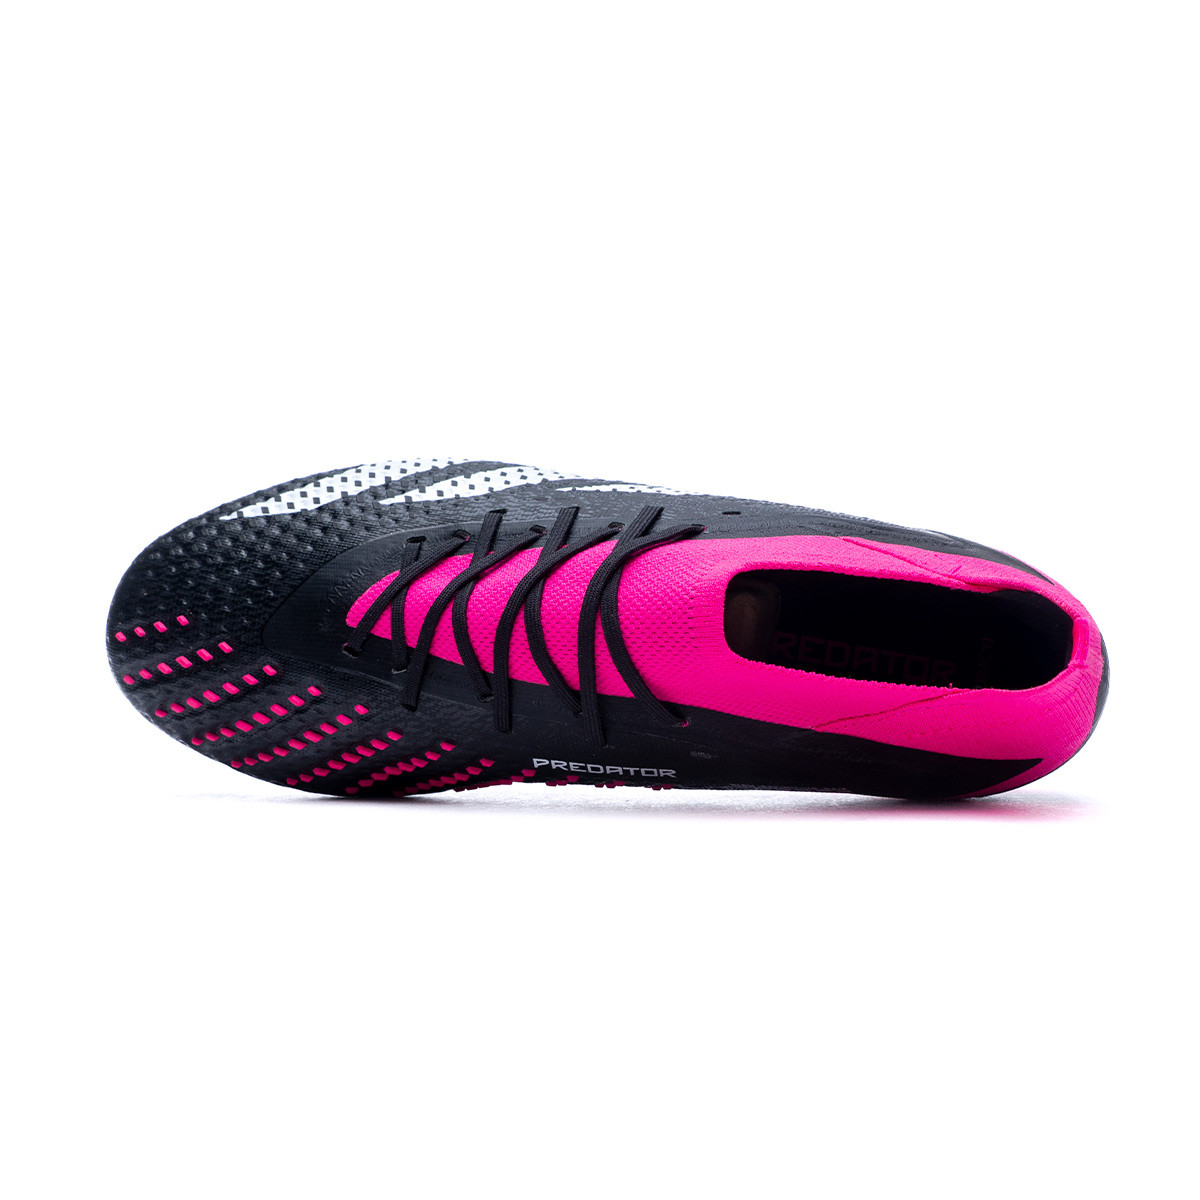 Adidas Predator Accuracy+ Firm Ground Soccer Cleats - Pink/Black/White 8.5